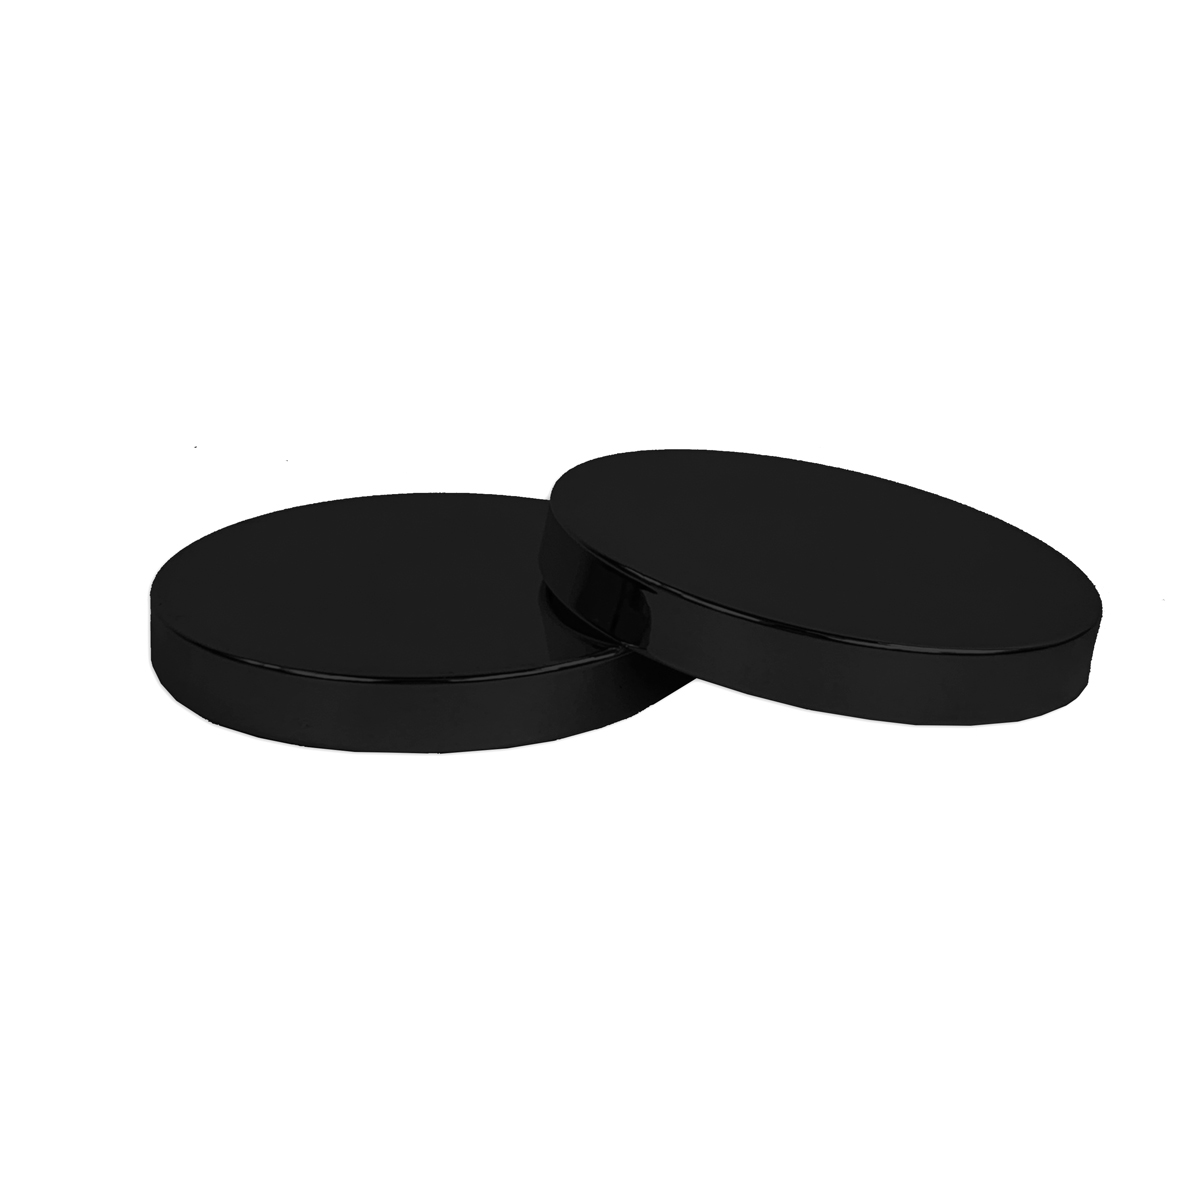 Monticiano Black Candle Lids